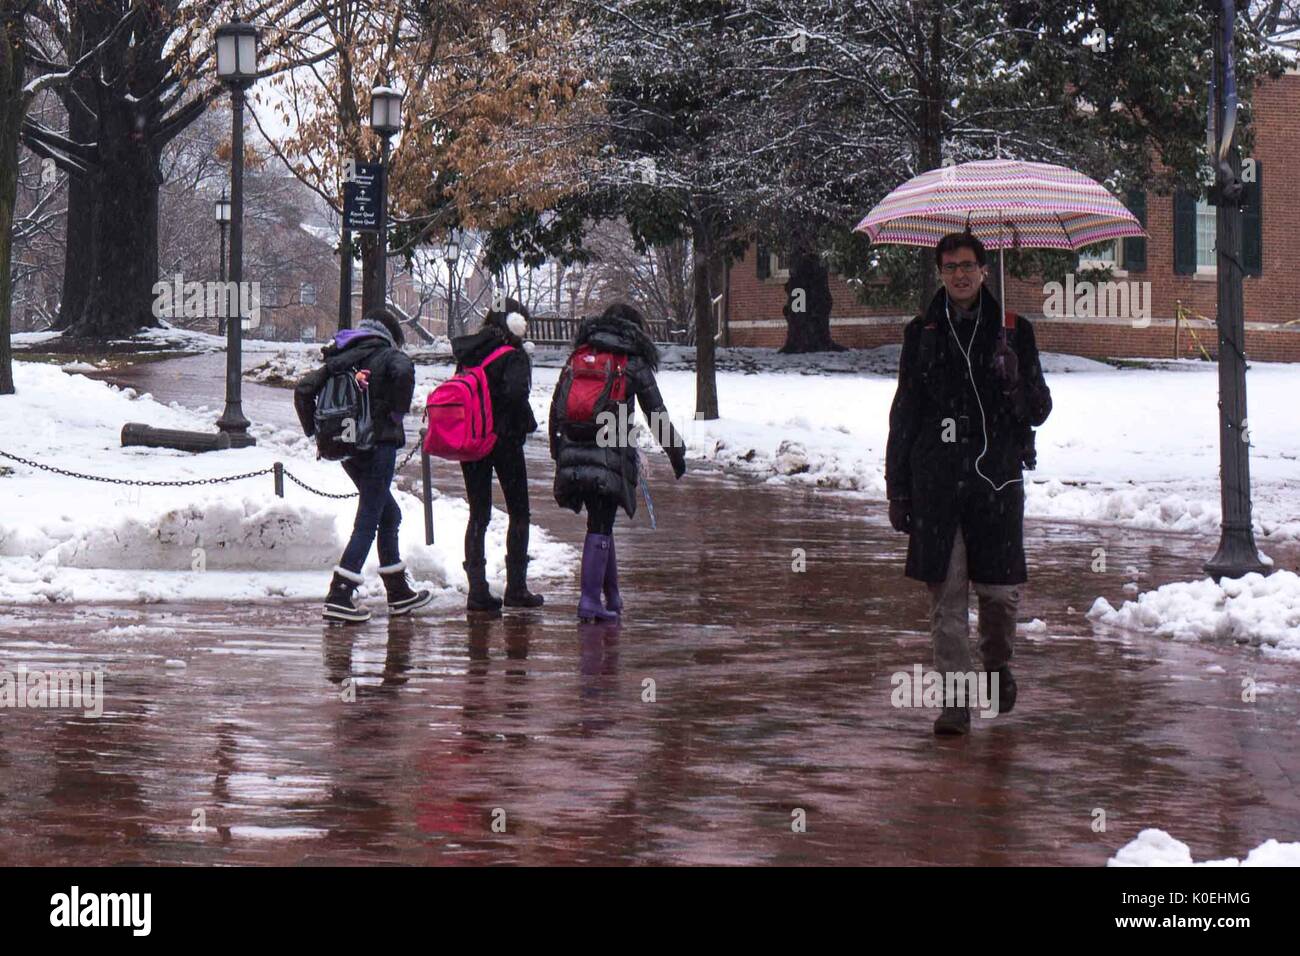 A male graduate student holding an umbrella walks towards the camera as three female undergraduate students in warm clothes and snow boots walk behind him in the opposite direction while it is raining and several inches of snow cover the ground, located between the Freshman Quad and Keyser Quad at Johns Hopkins University, Baltimore, Maryland, December 10, 2013. Courtesy Eric Chen. Stock Photo